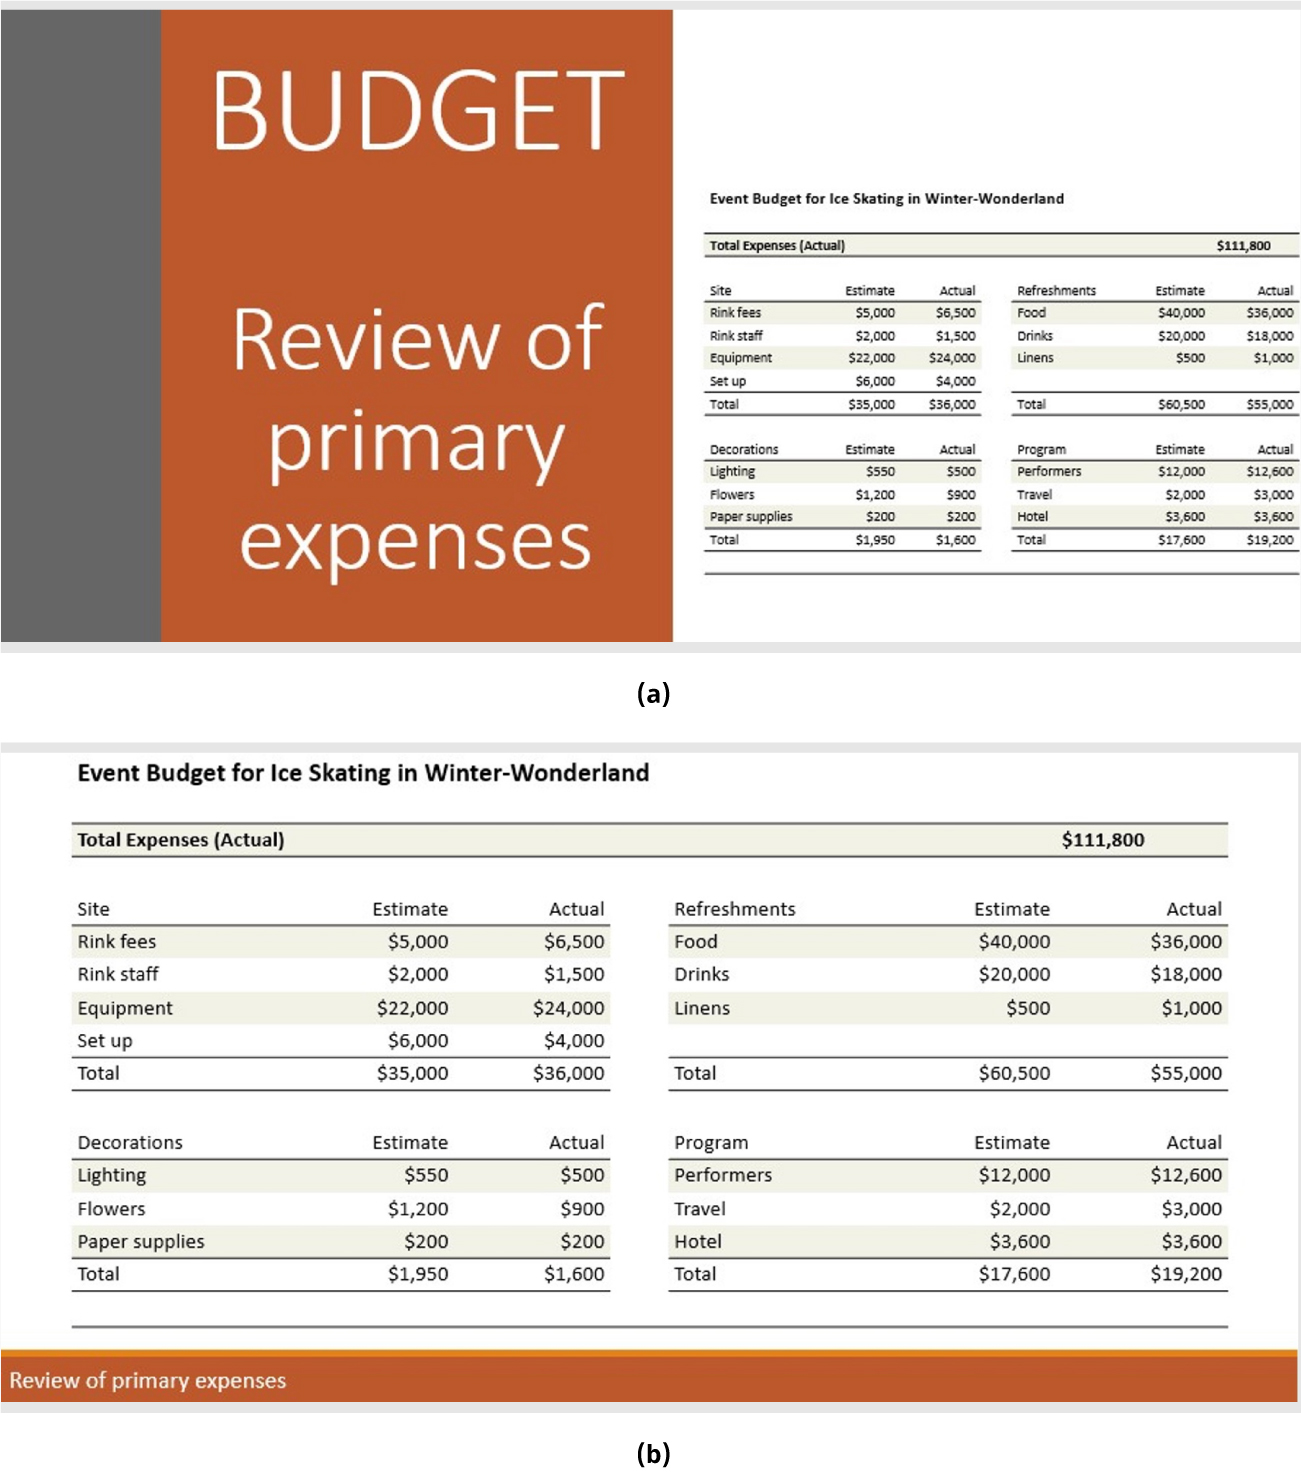 A (a) budget sheet in small font at the right with a large image at the left and (b) the same budget sheet in larger font with small graphics along the bottom.